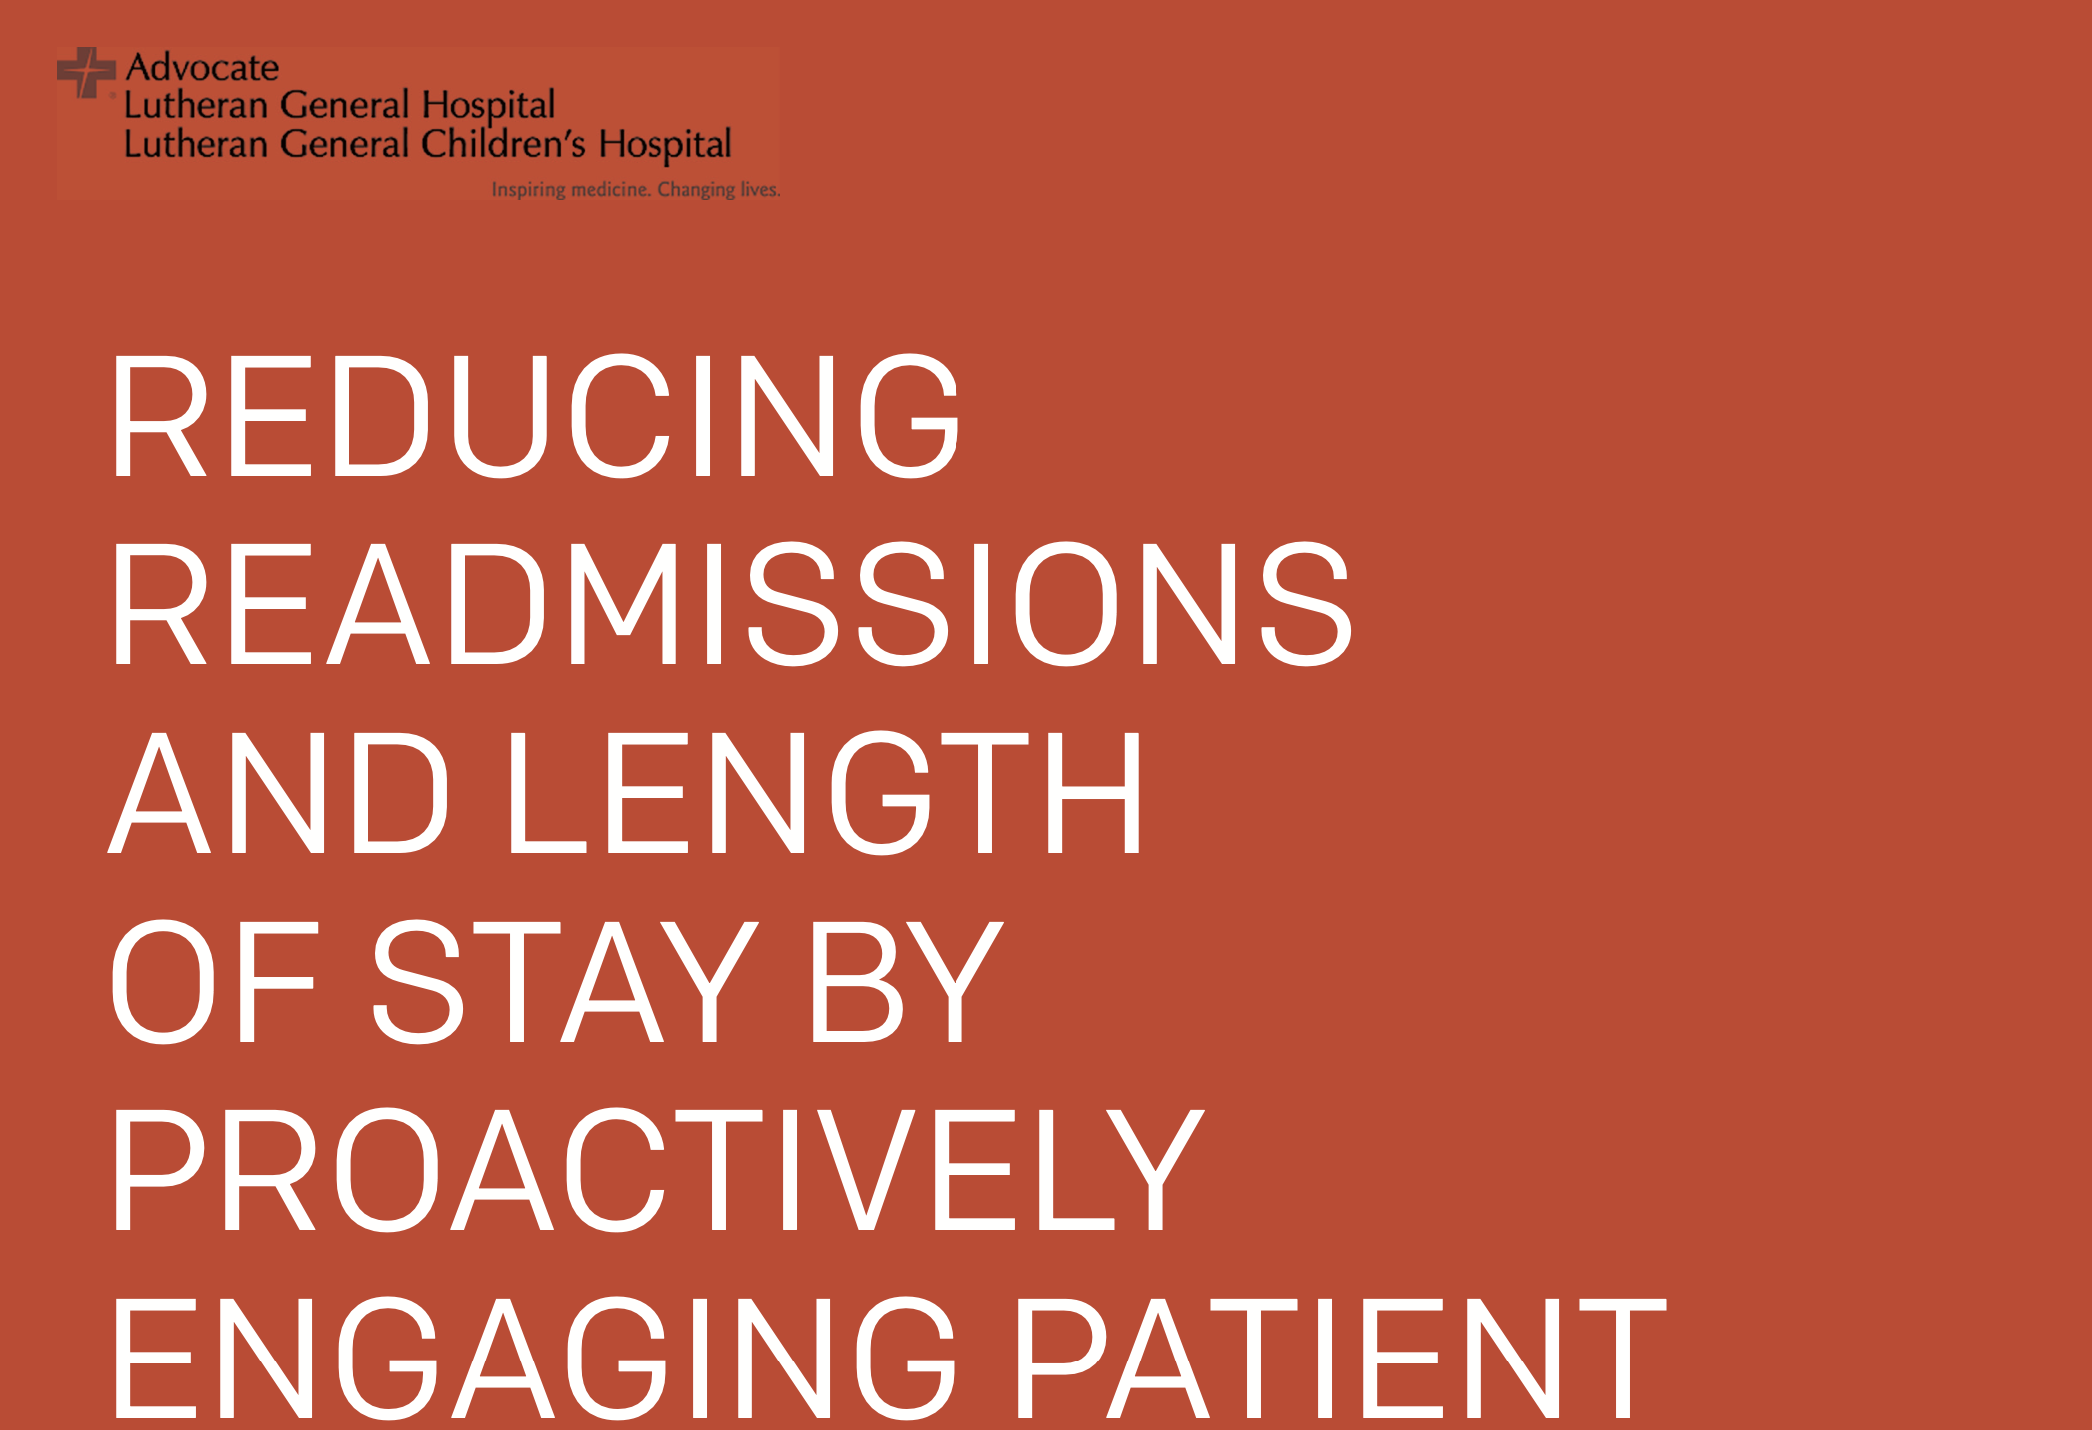 Case Study: Advocate Readmissions